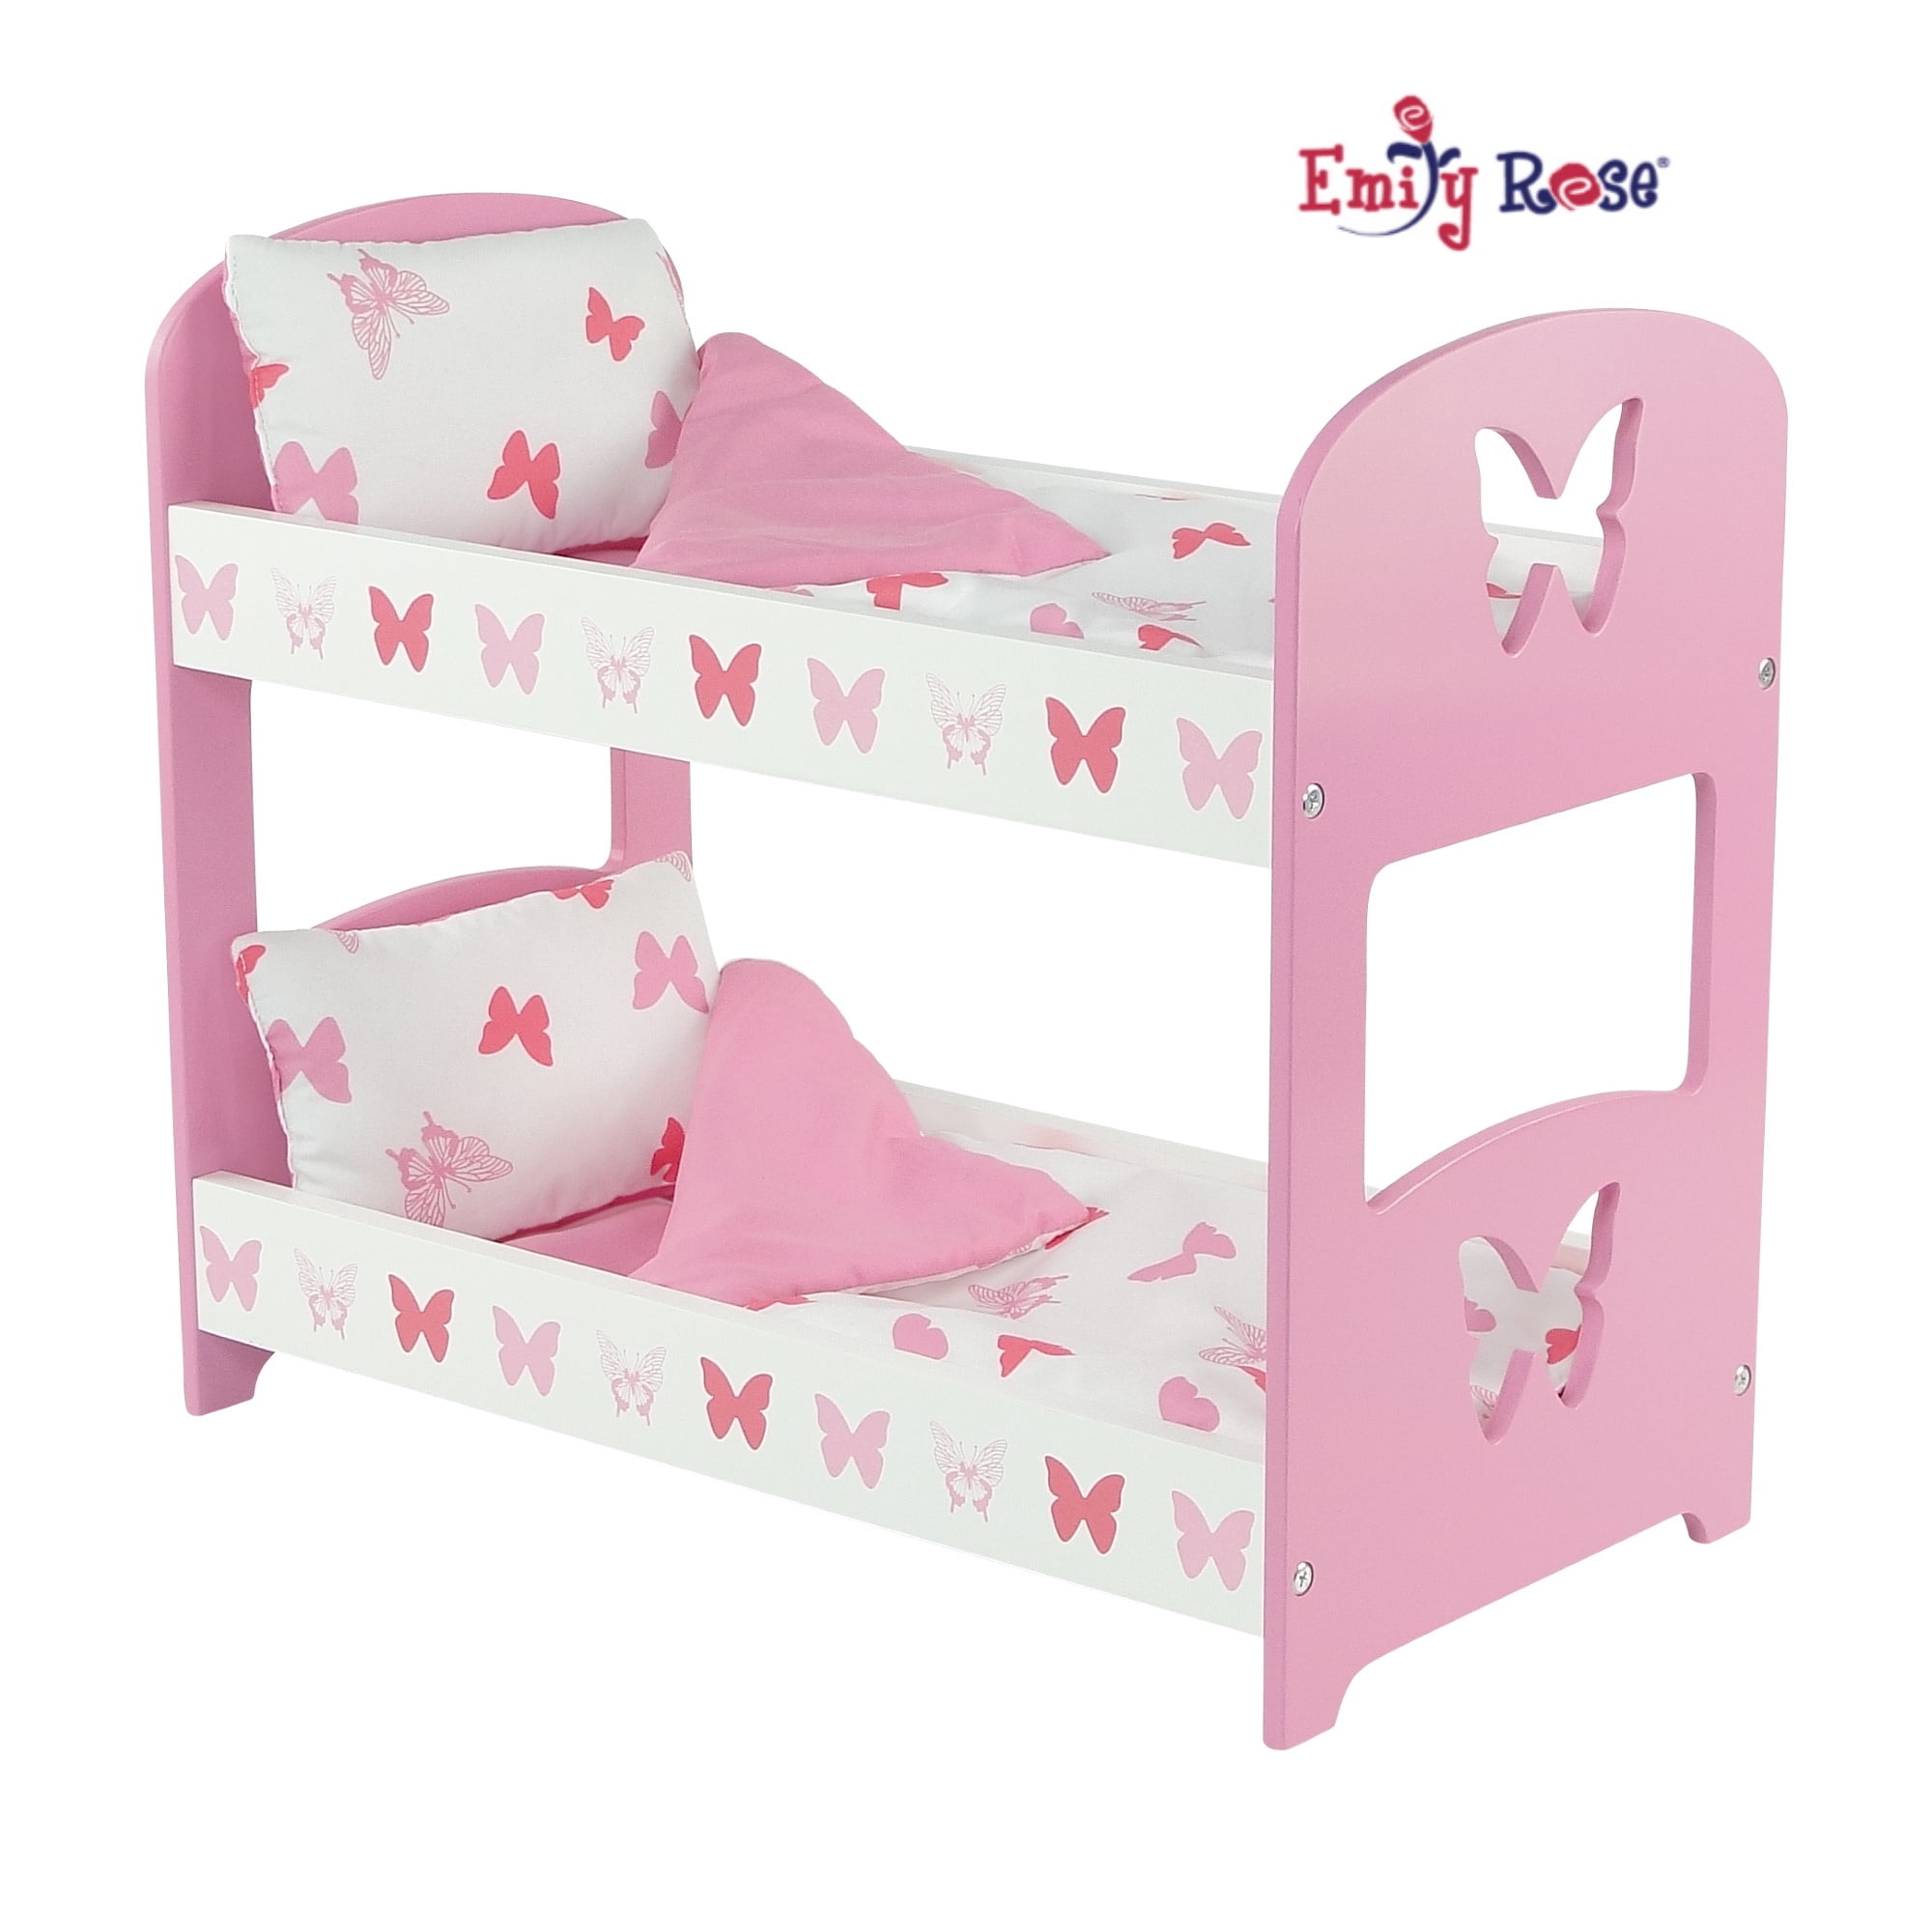 Emily Rose 18 Inch Doll Bed Com, Toy Bunk Beds